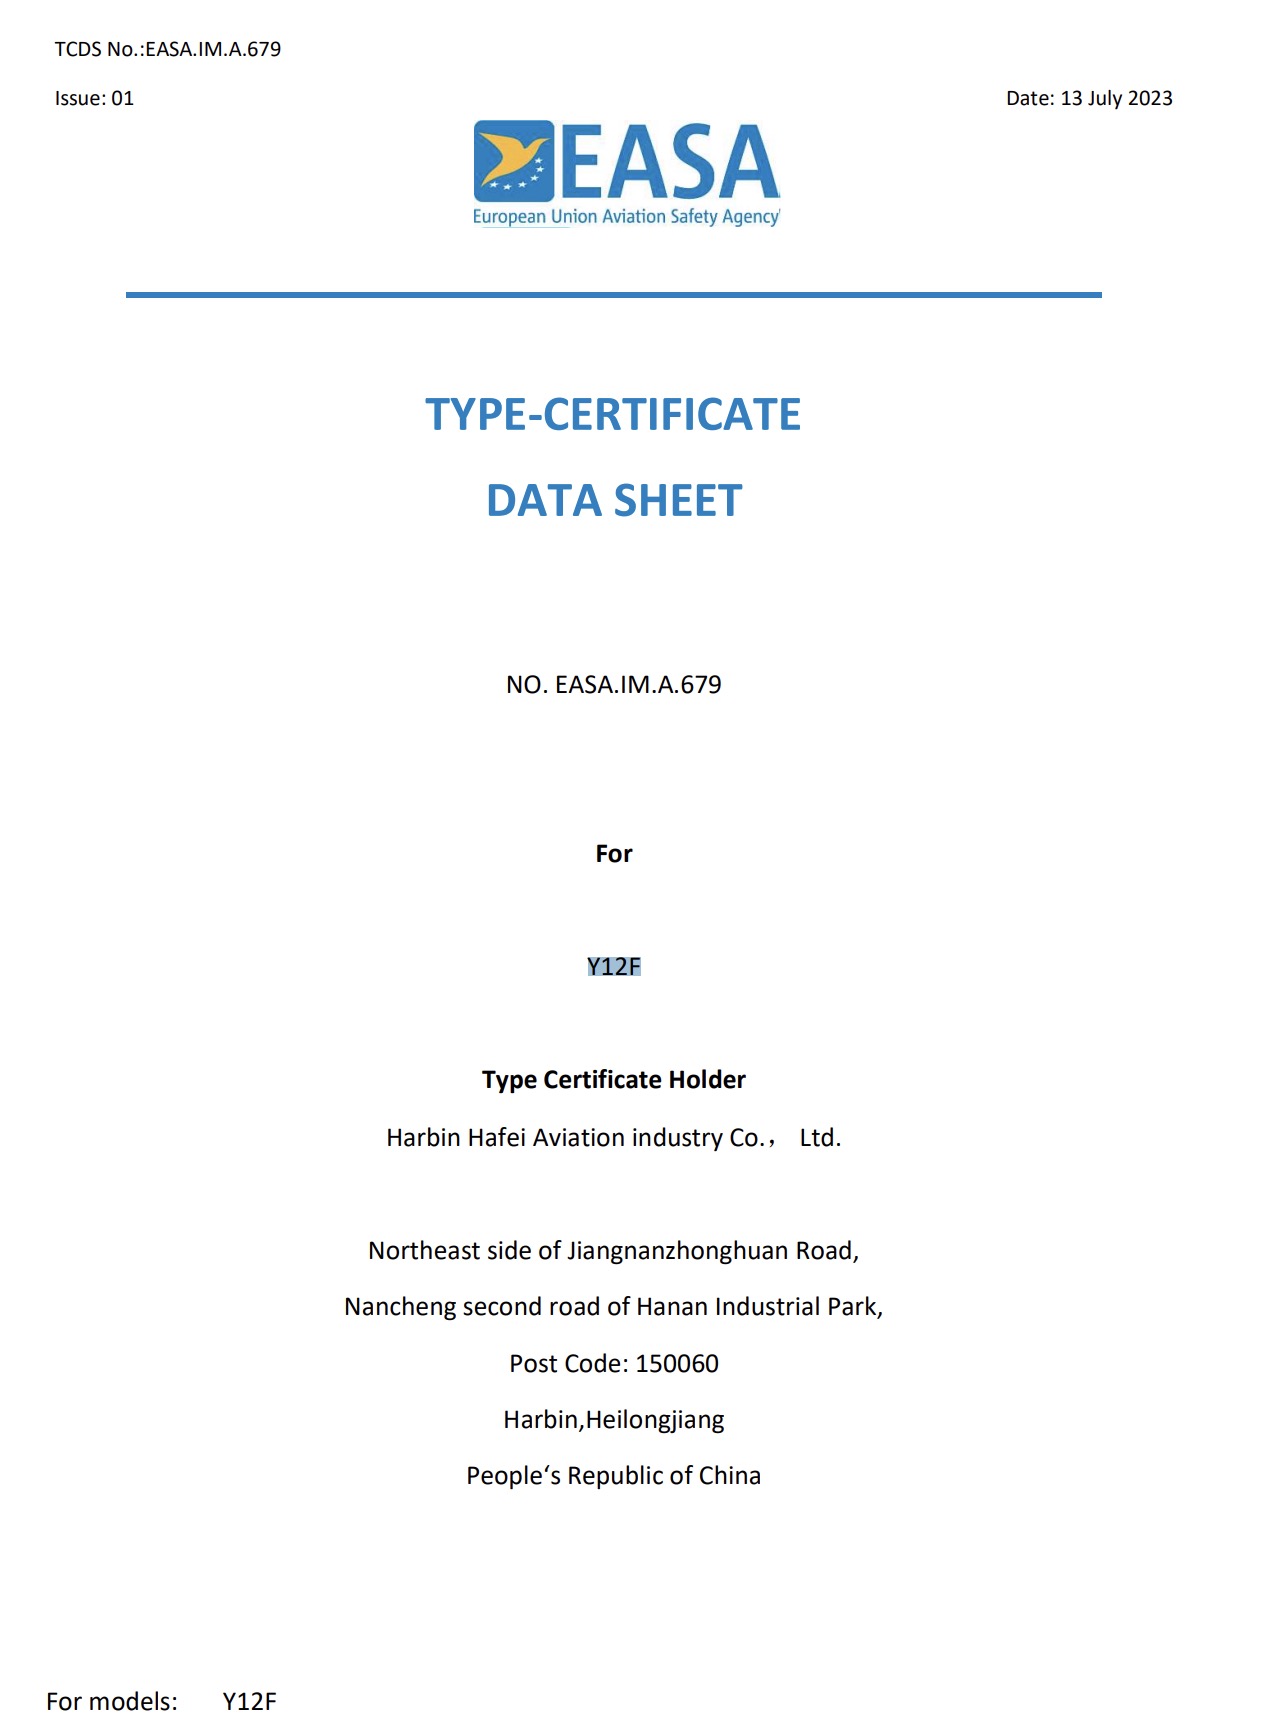 A screenshot of a type certificate granted by the European Union Aviation Safety Agency (EASA) to Y-12F, July 13, 2023. /EASA